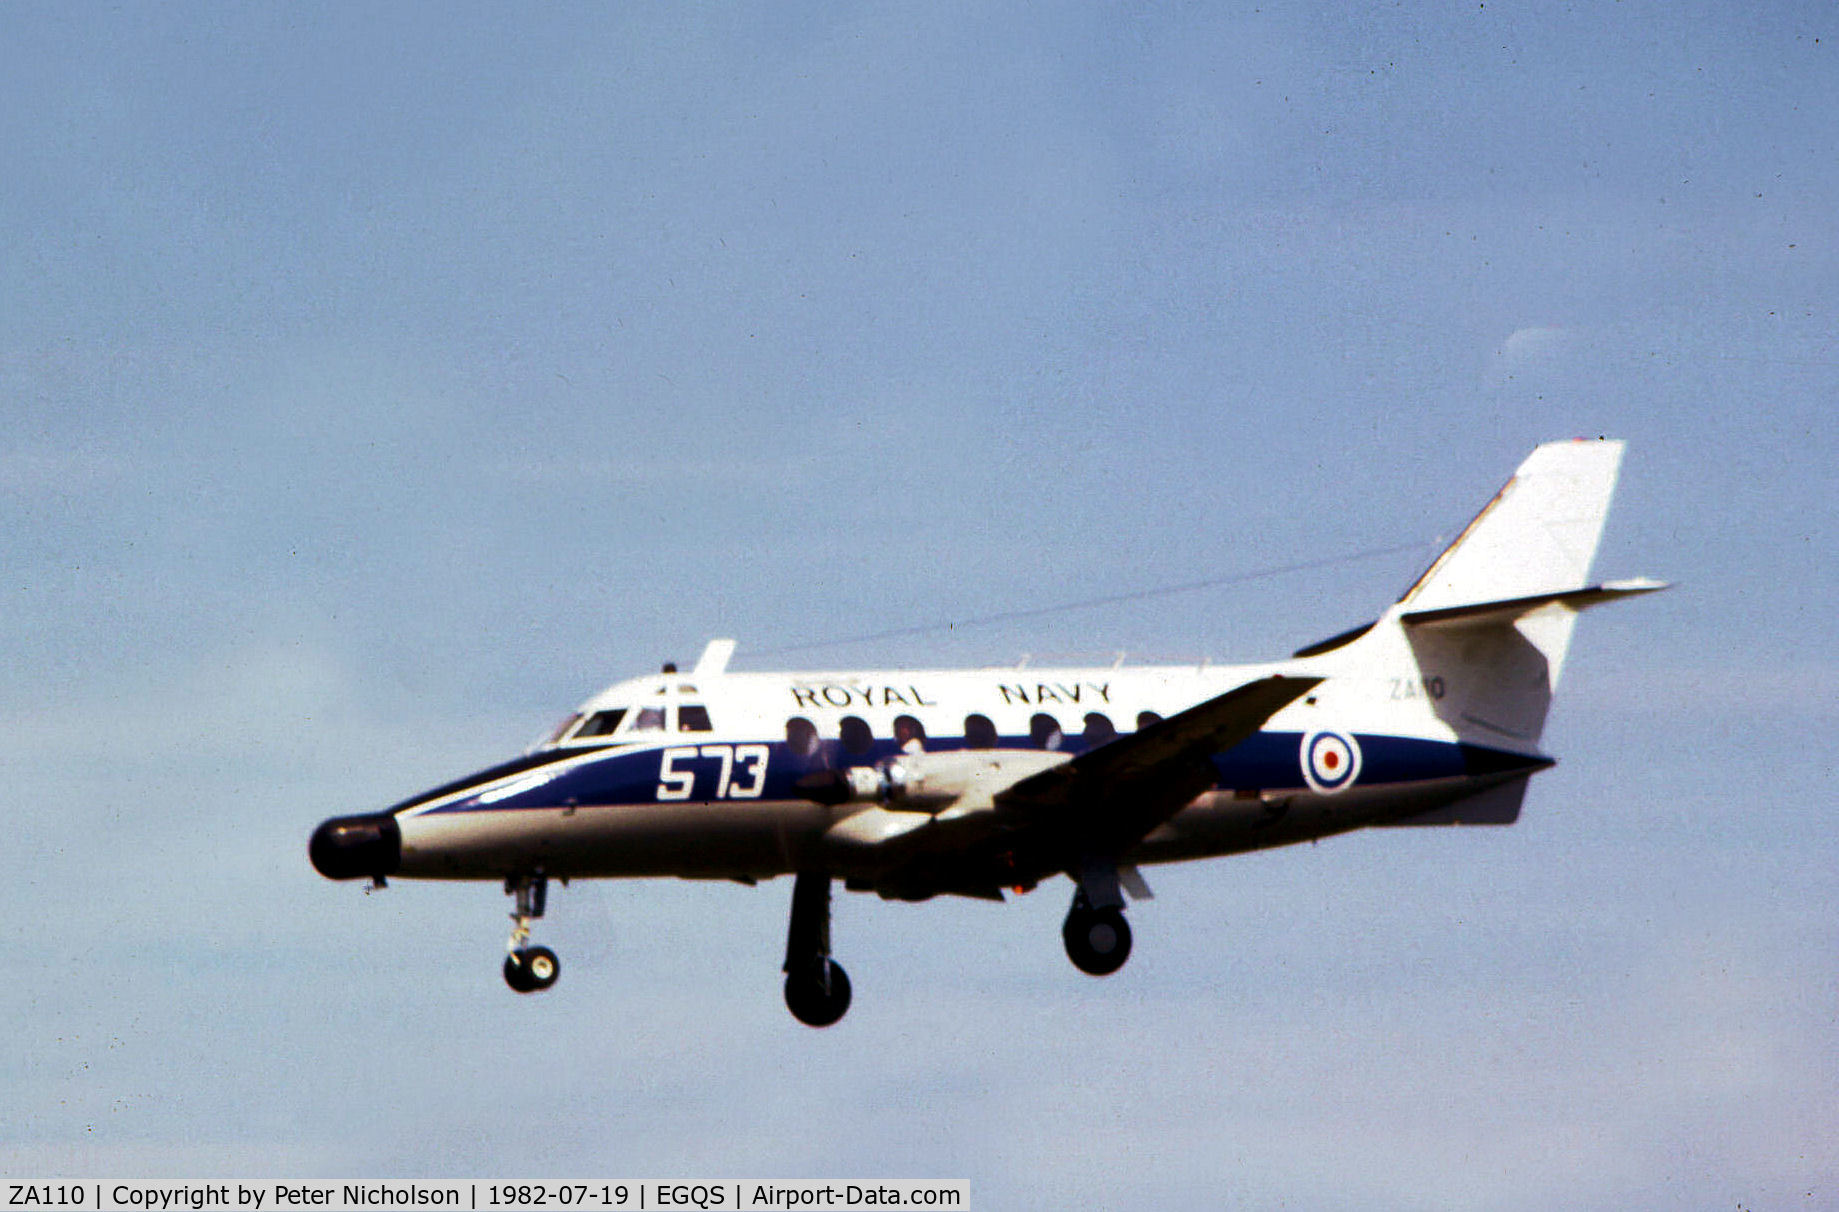 ZA110, 1971 Scottish Aviation HP-137 Jetstream T.2 C/N 248, Jetstream T.2 of 750 Squadron based at RNAS Culdrose on final approach to Runway 23 at RAF Lossiemouth in the Summer of 1982